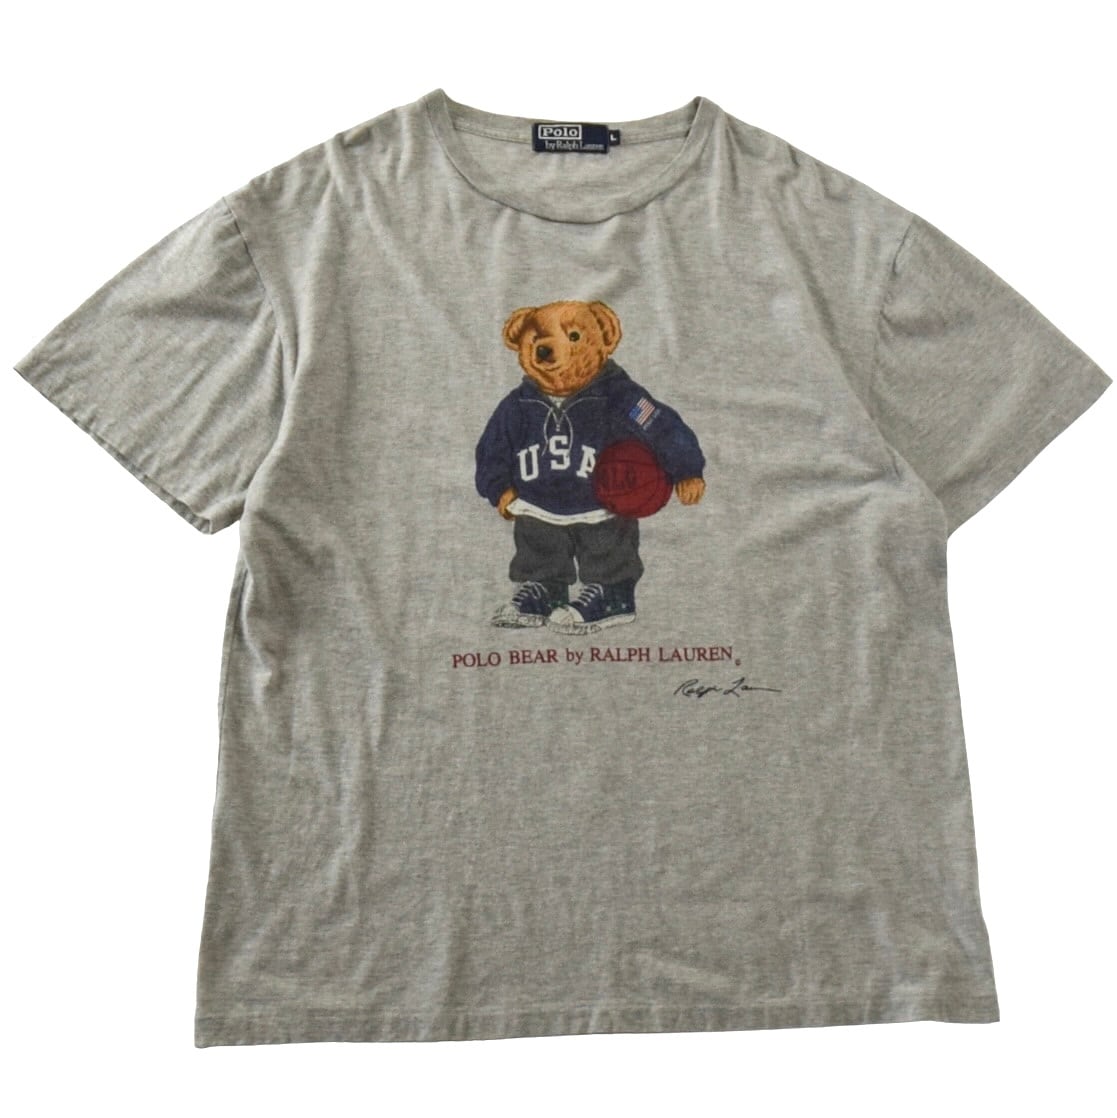 's   "Polo by Ralph Lauren" S/S POLO BEAR Vintage Printed T